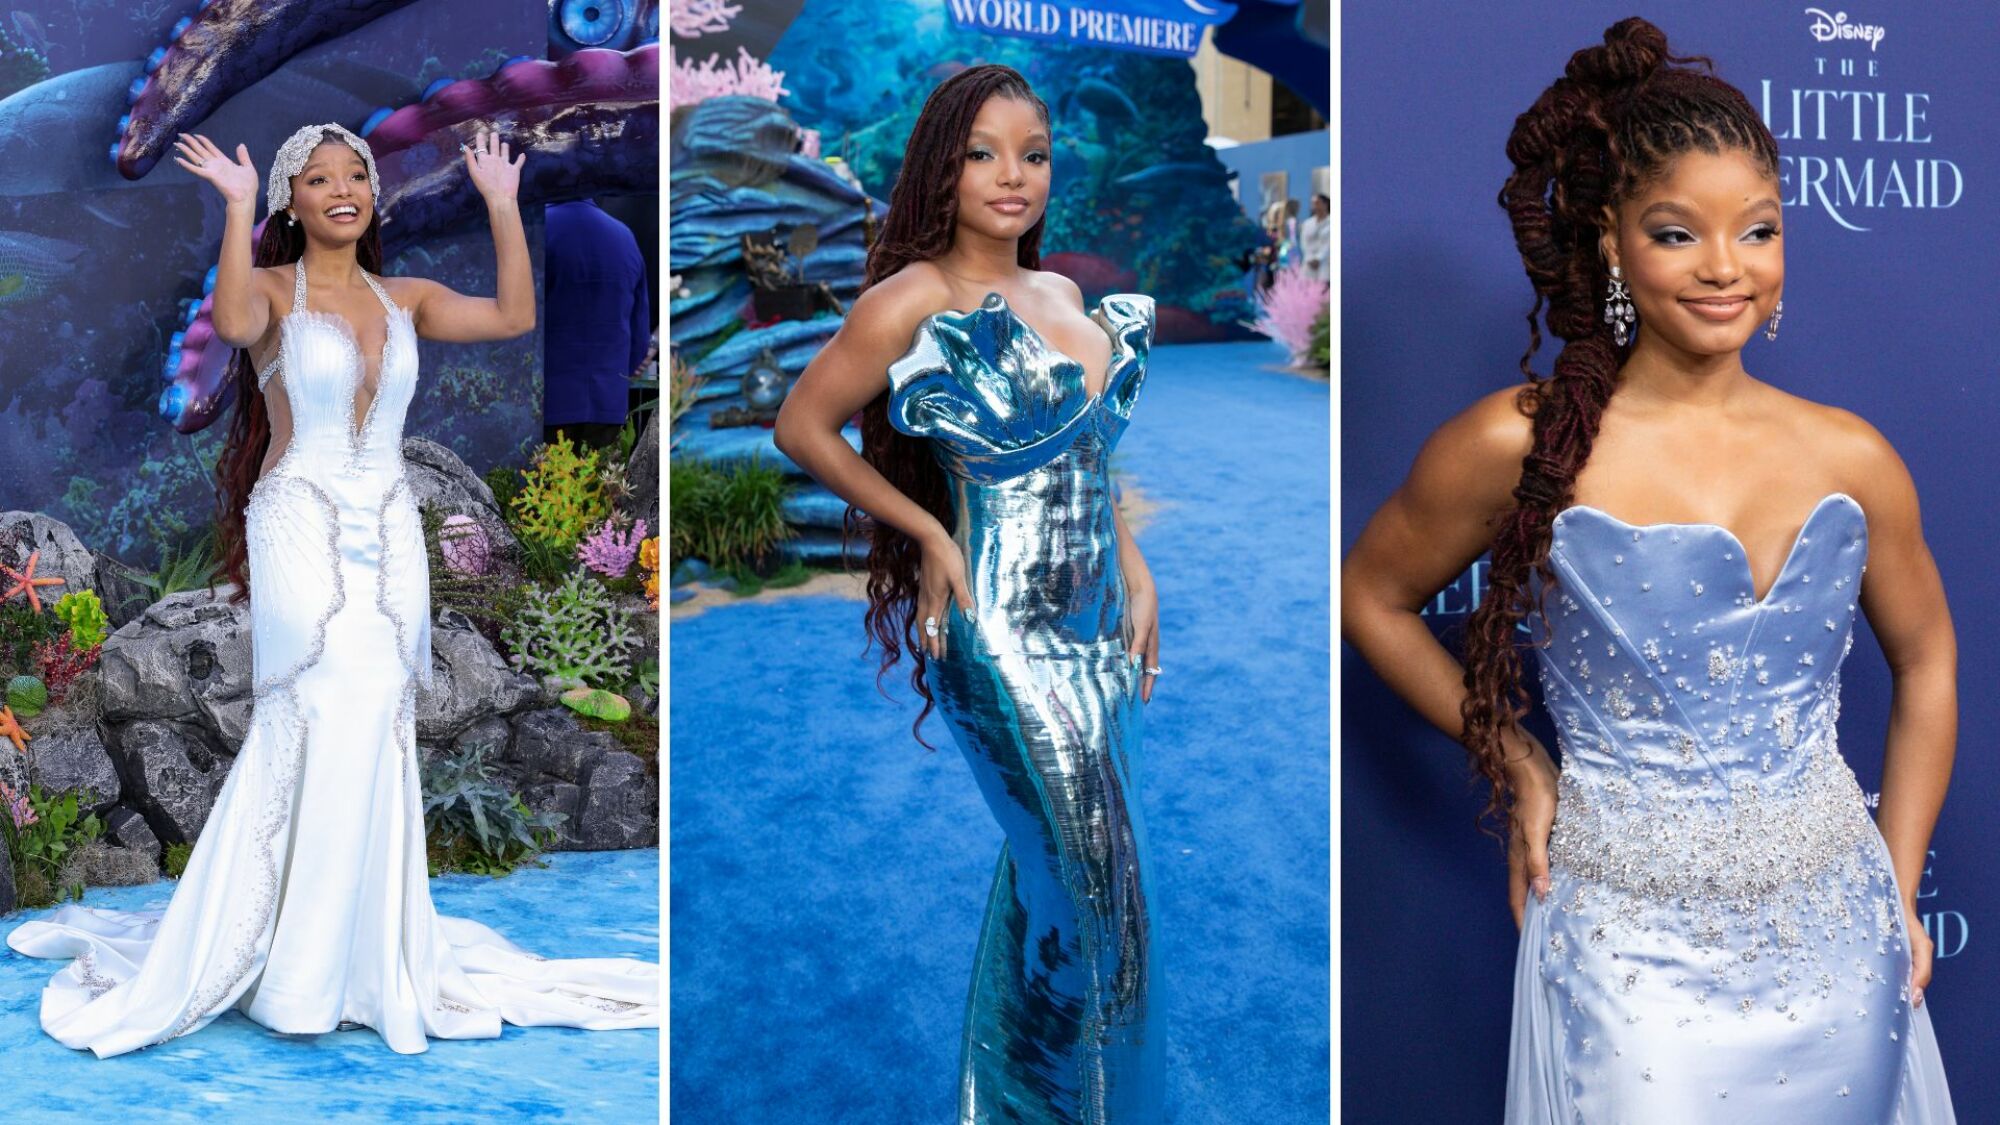 Three photos of Halle Bailey in various mermaid-like gowns at "The Little Mermaid" premieres.